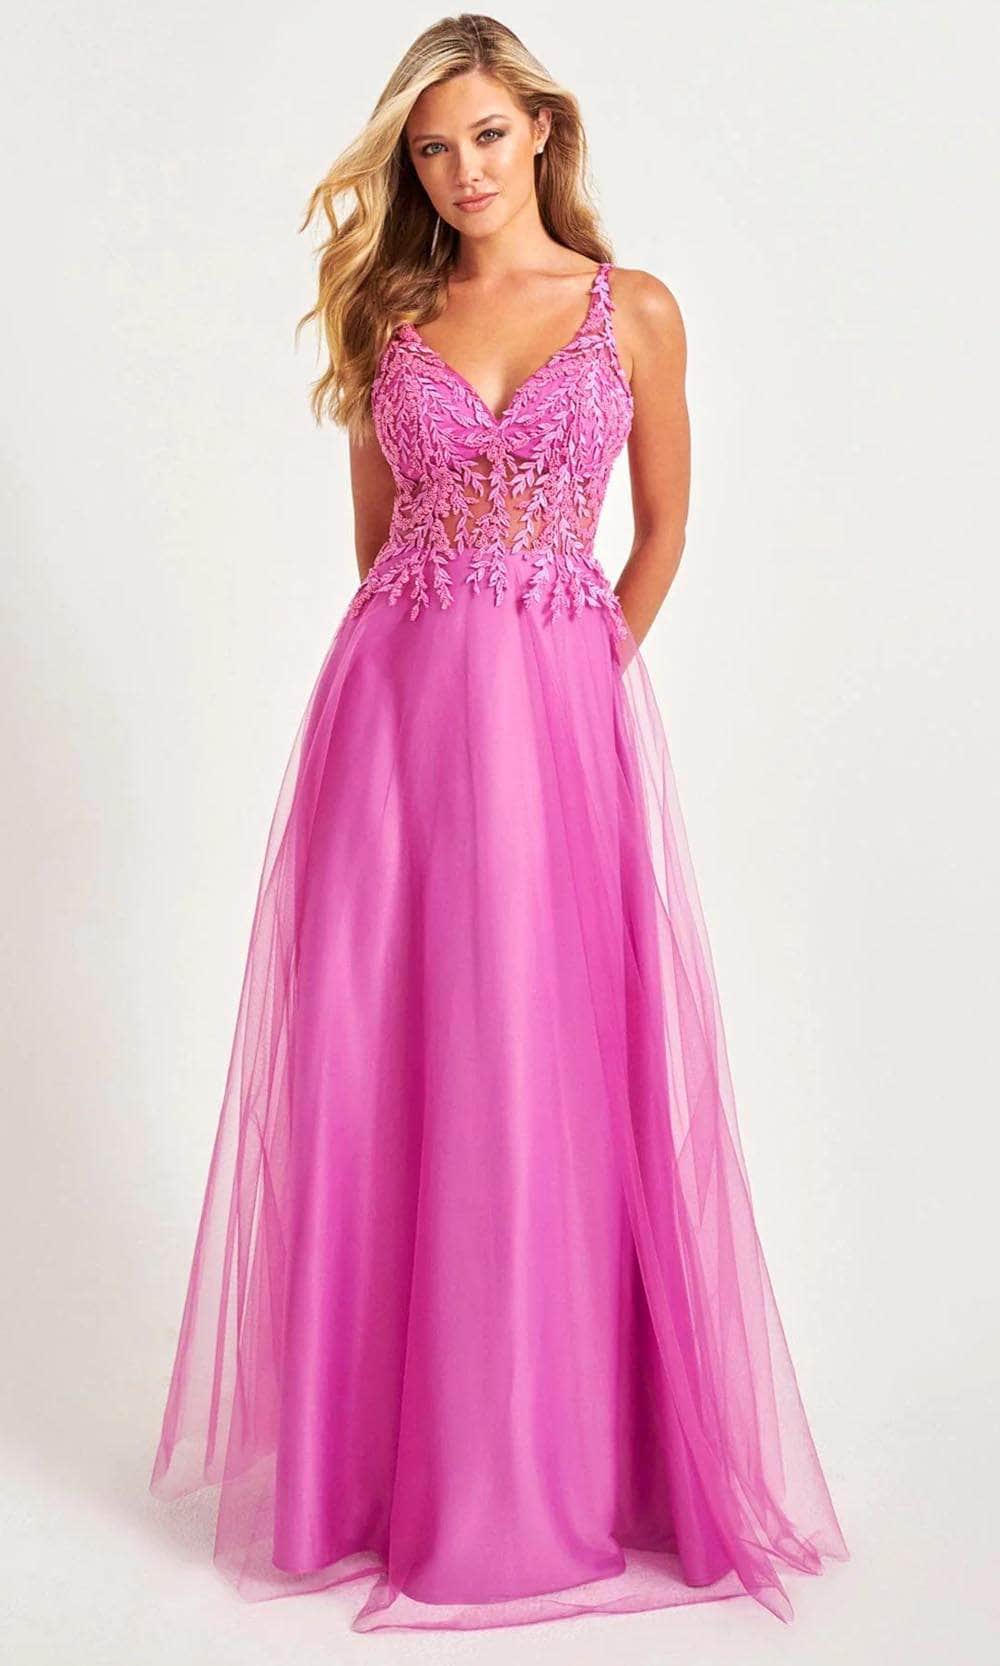 Image of Faviana 11055 - Applique V-Neck Prom Gown